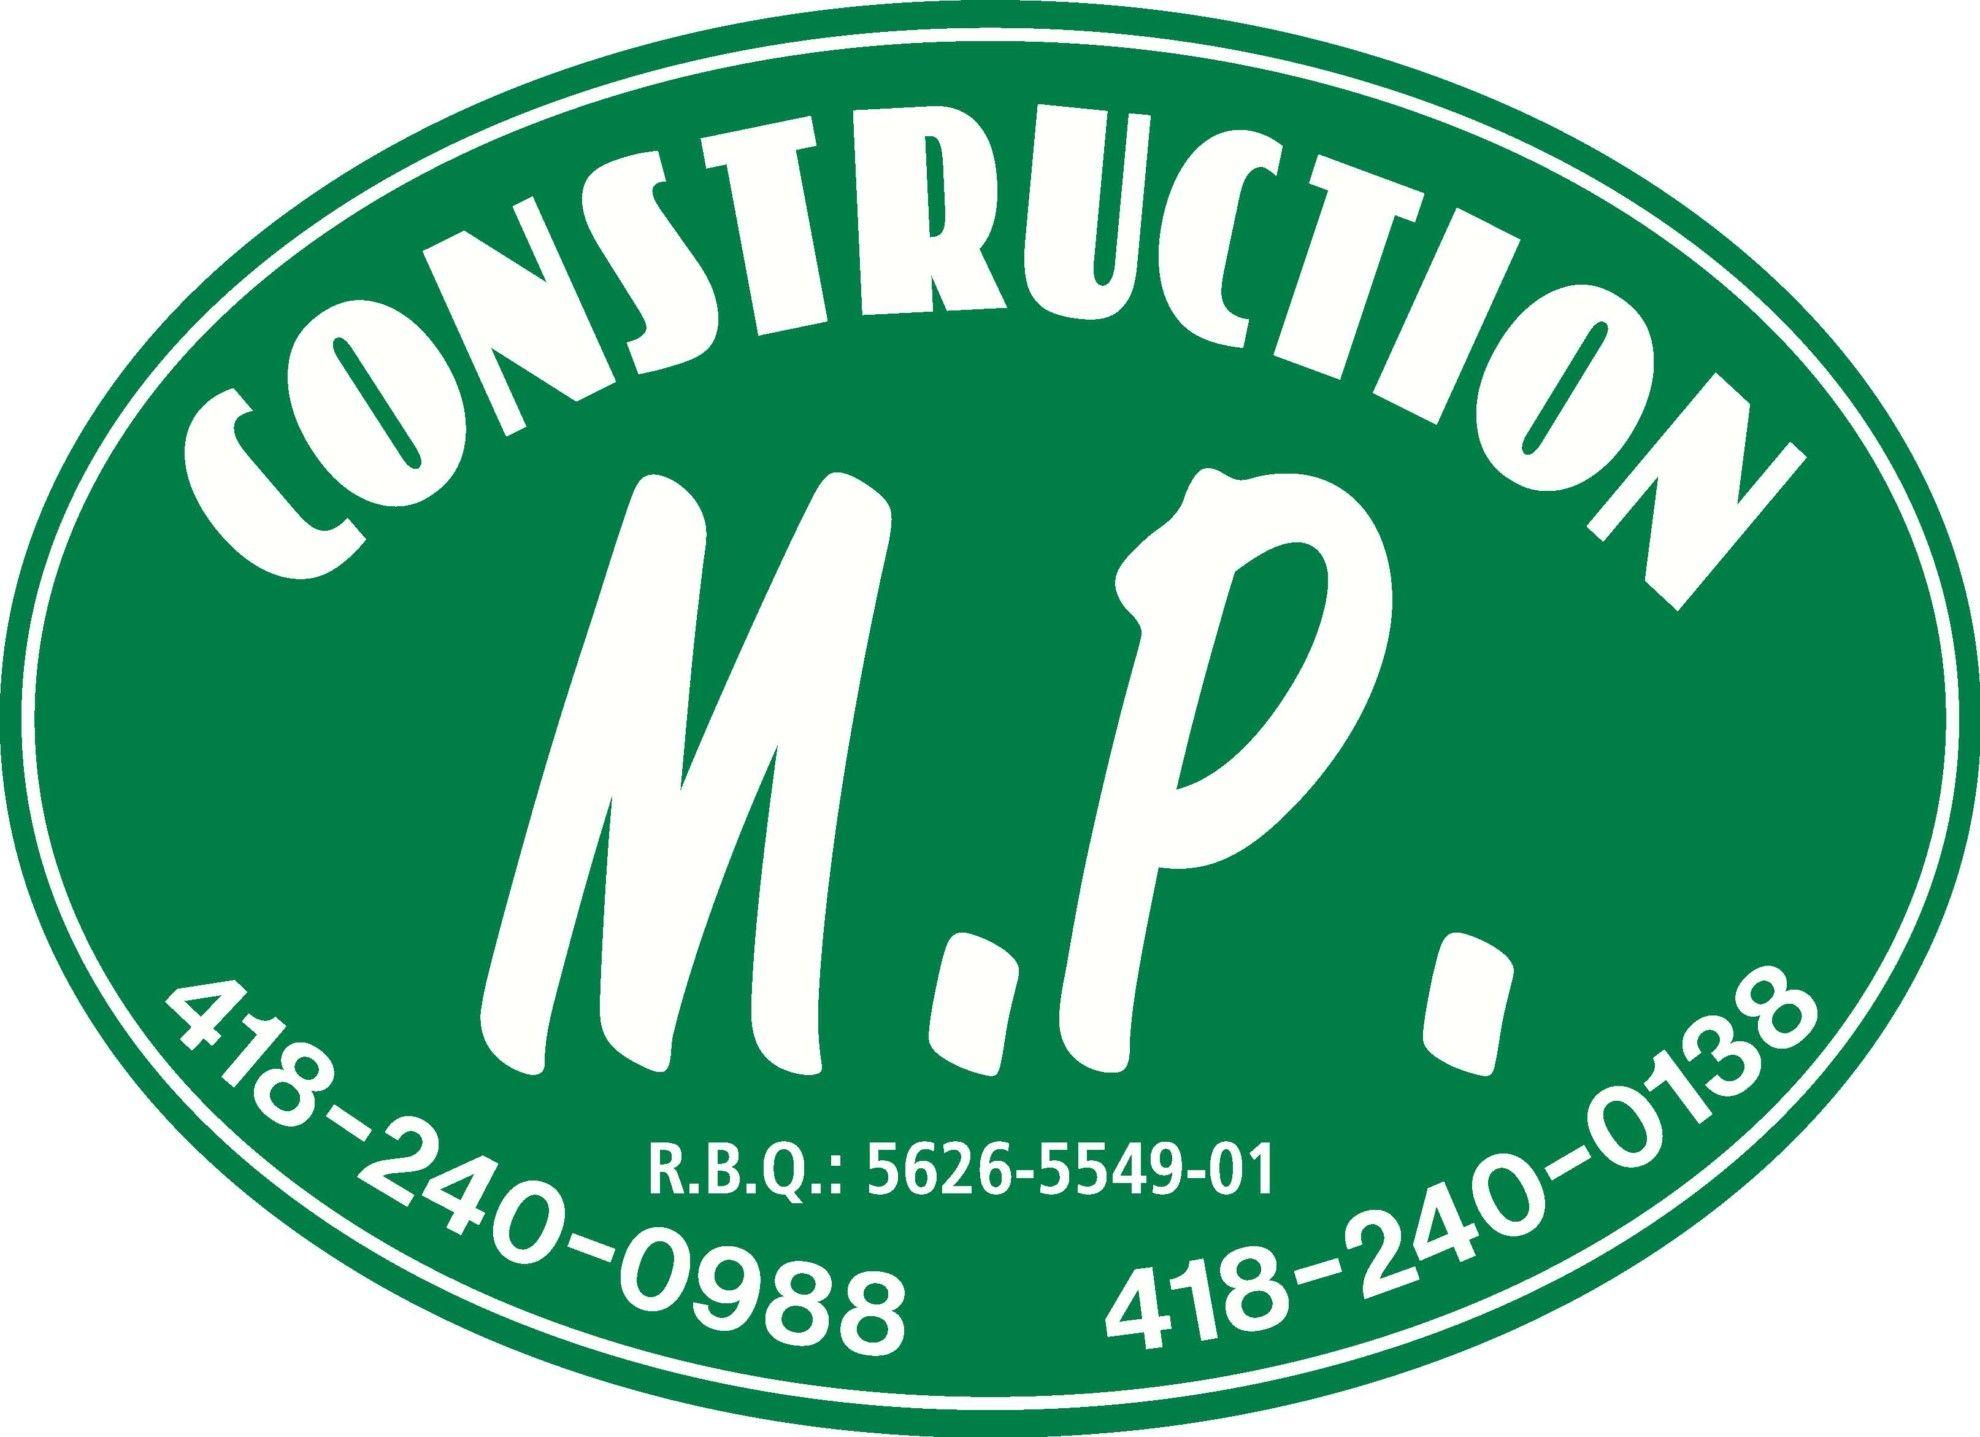 Green MP Logo - Index of /wp-content/uploads/2018/04